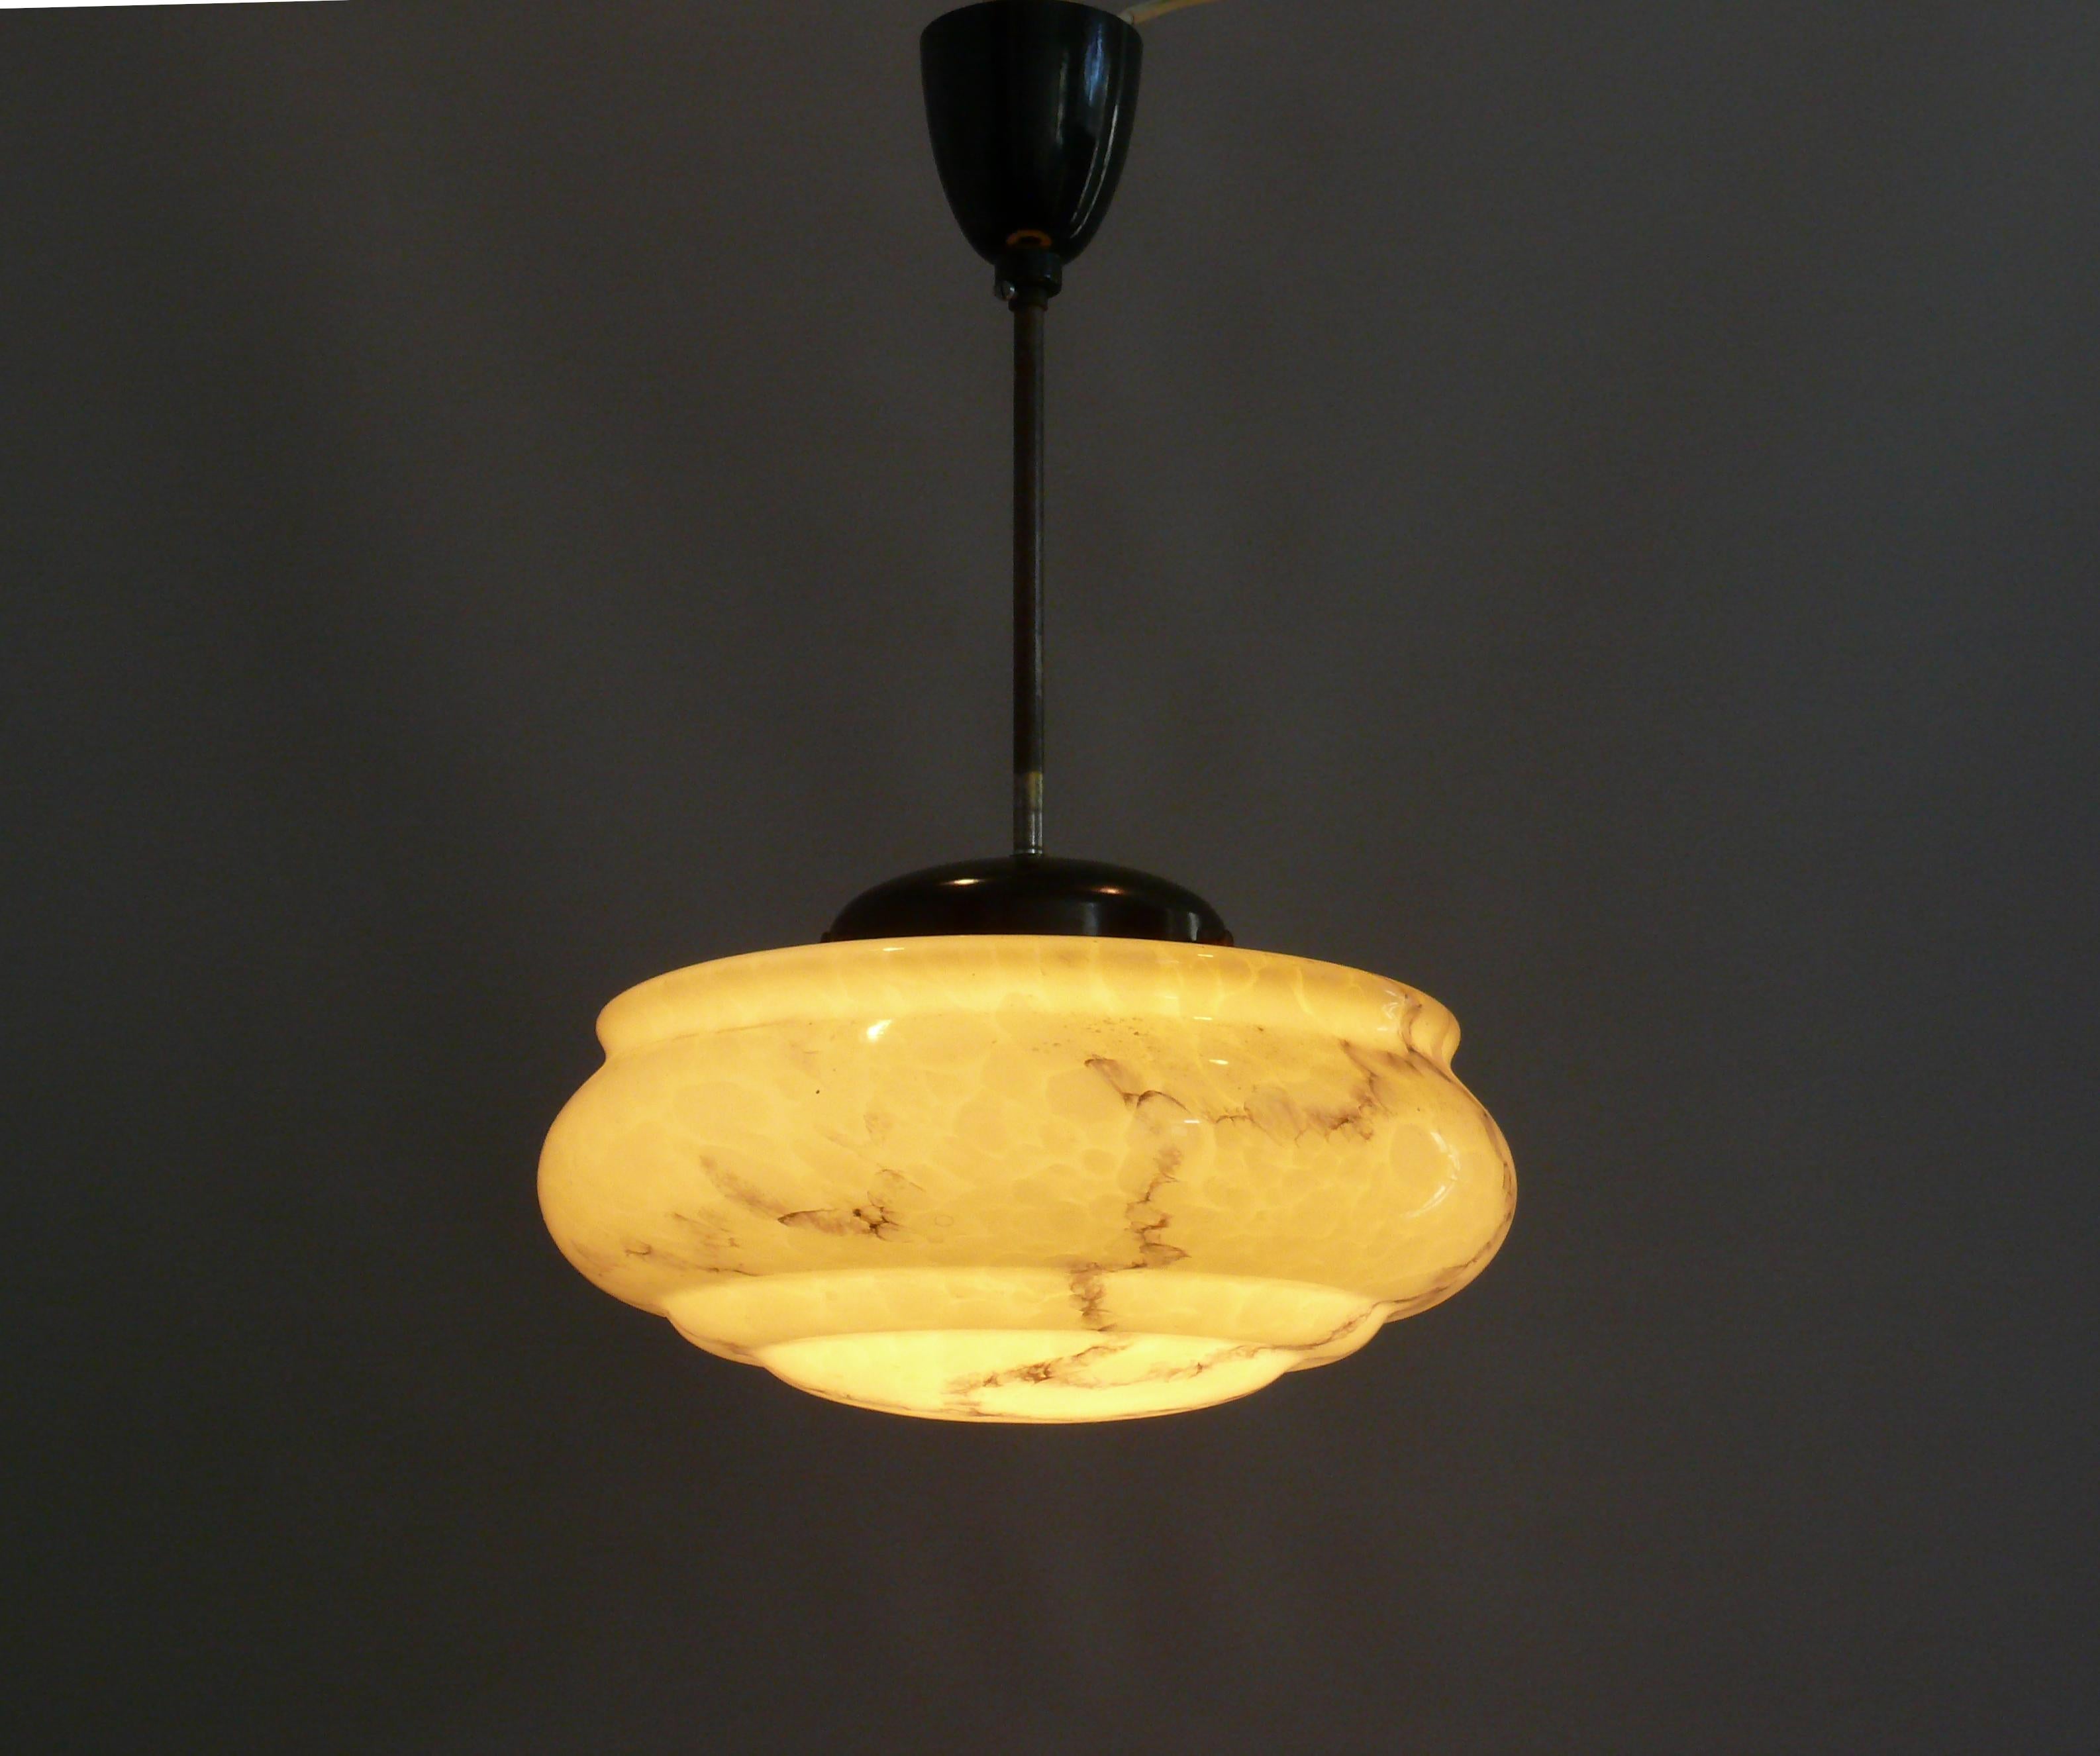 Art Deco rod pendant lamp from the 1930s - 1950s with a very beautiful profiled, beige glass shade in good condition. The glass shade has subtle marbling and profiling on the underside of the shade. The glass holder and the canopy are made of